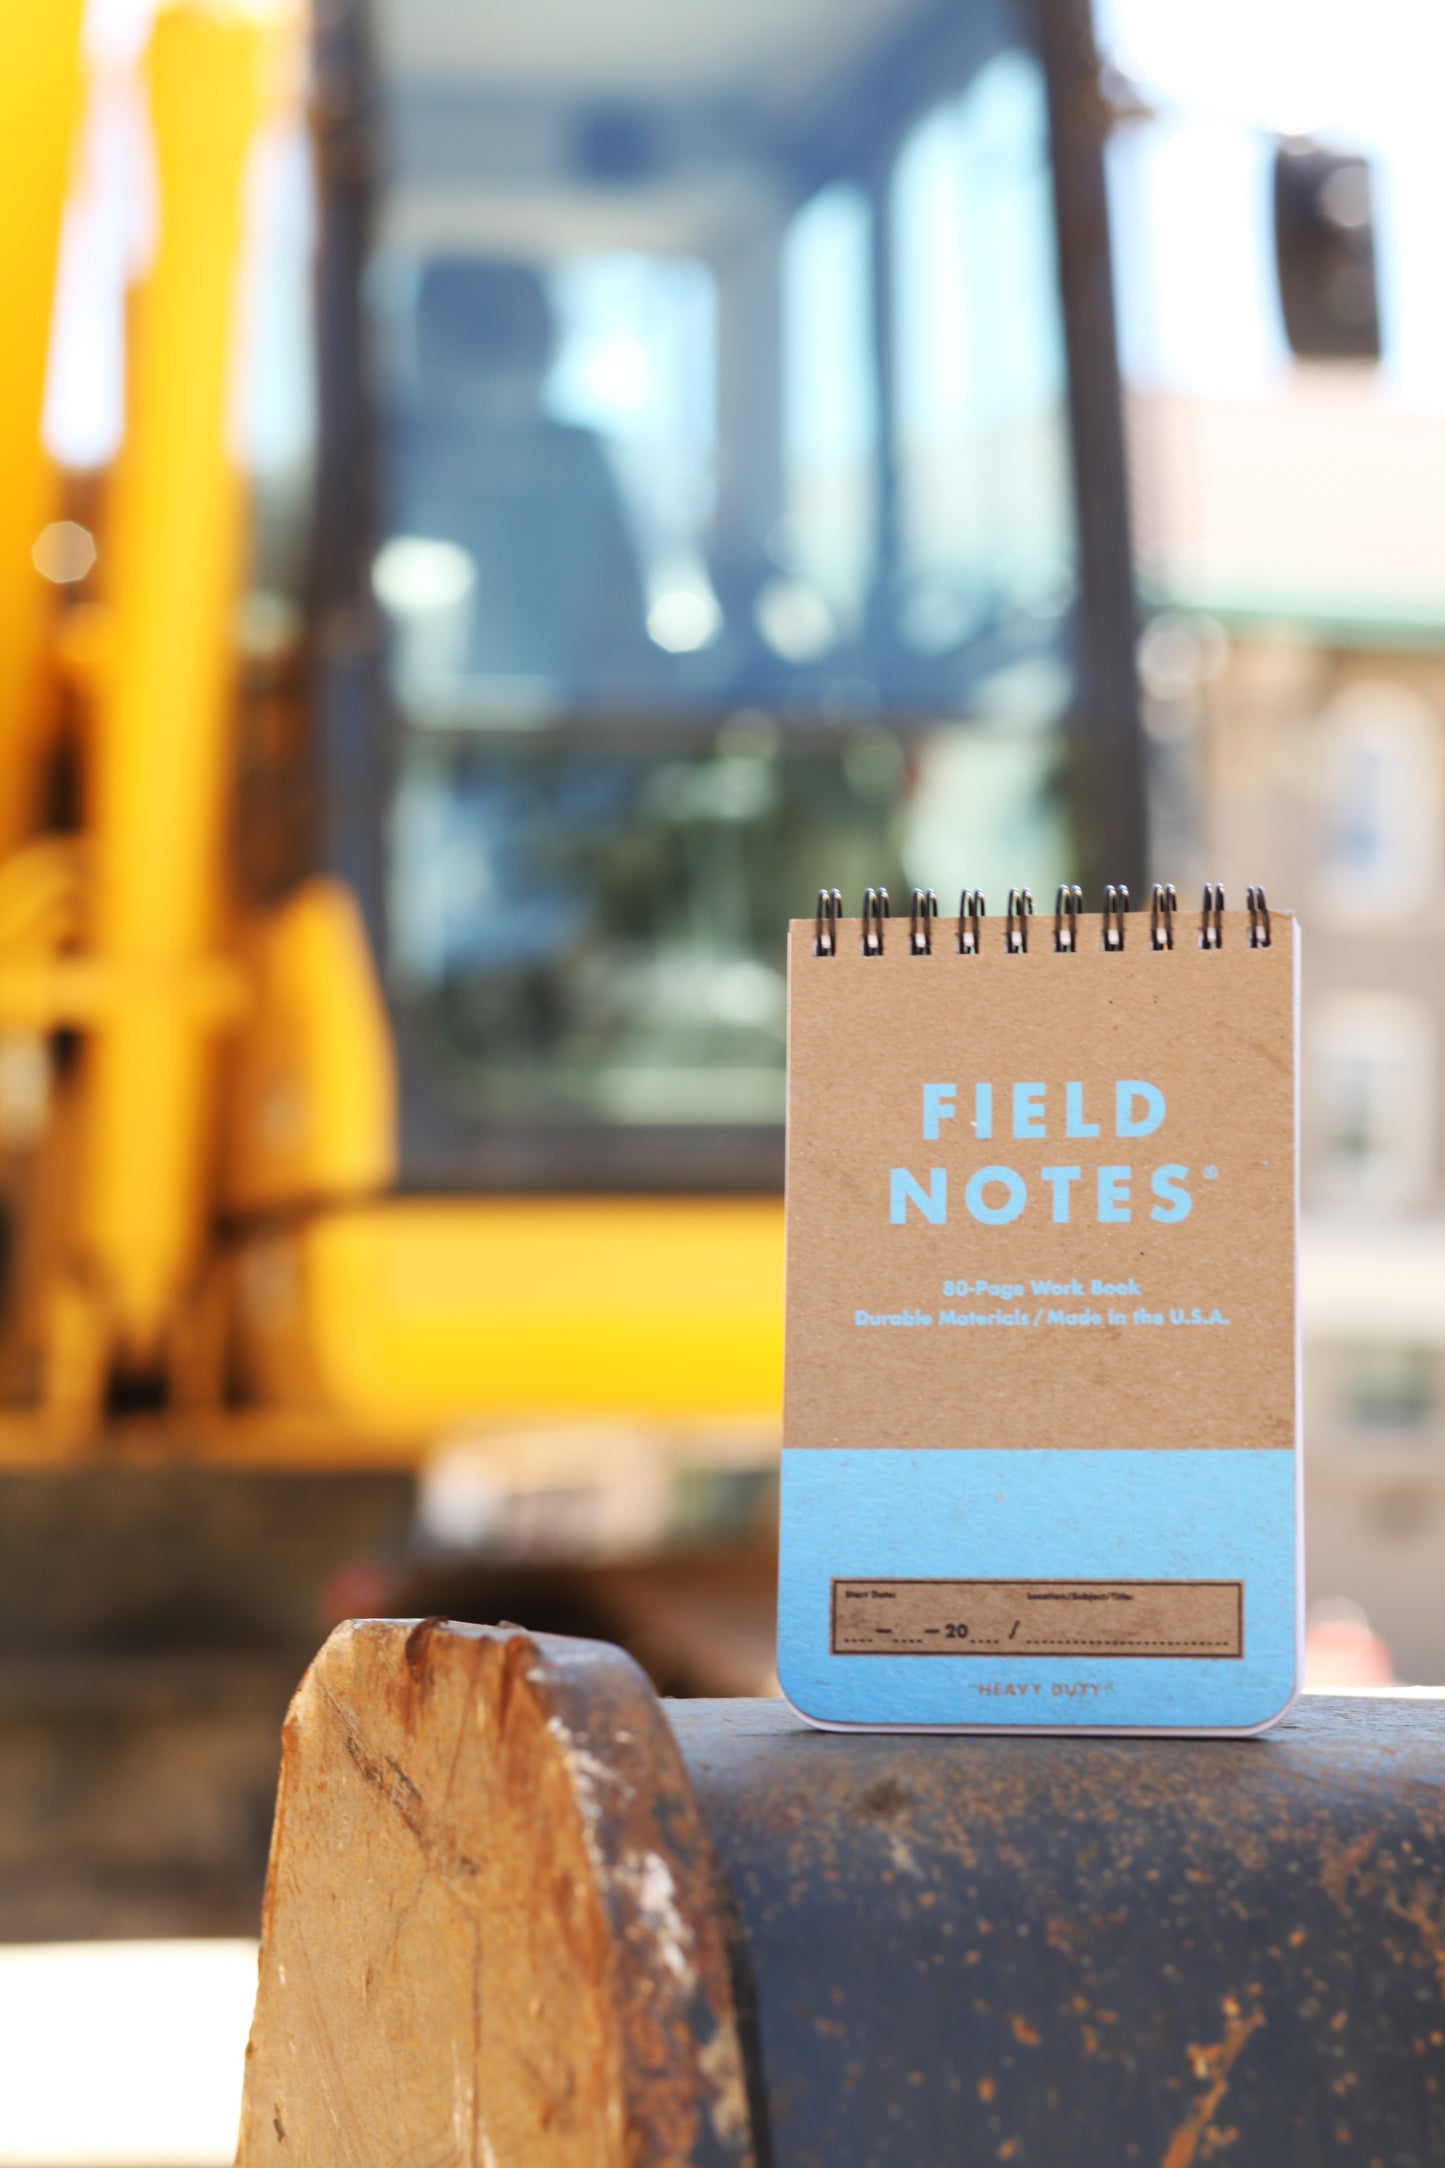 Field Notes: Heavy Duty Memo Book - 2 Pack